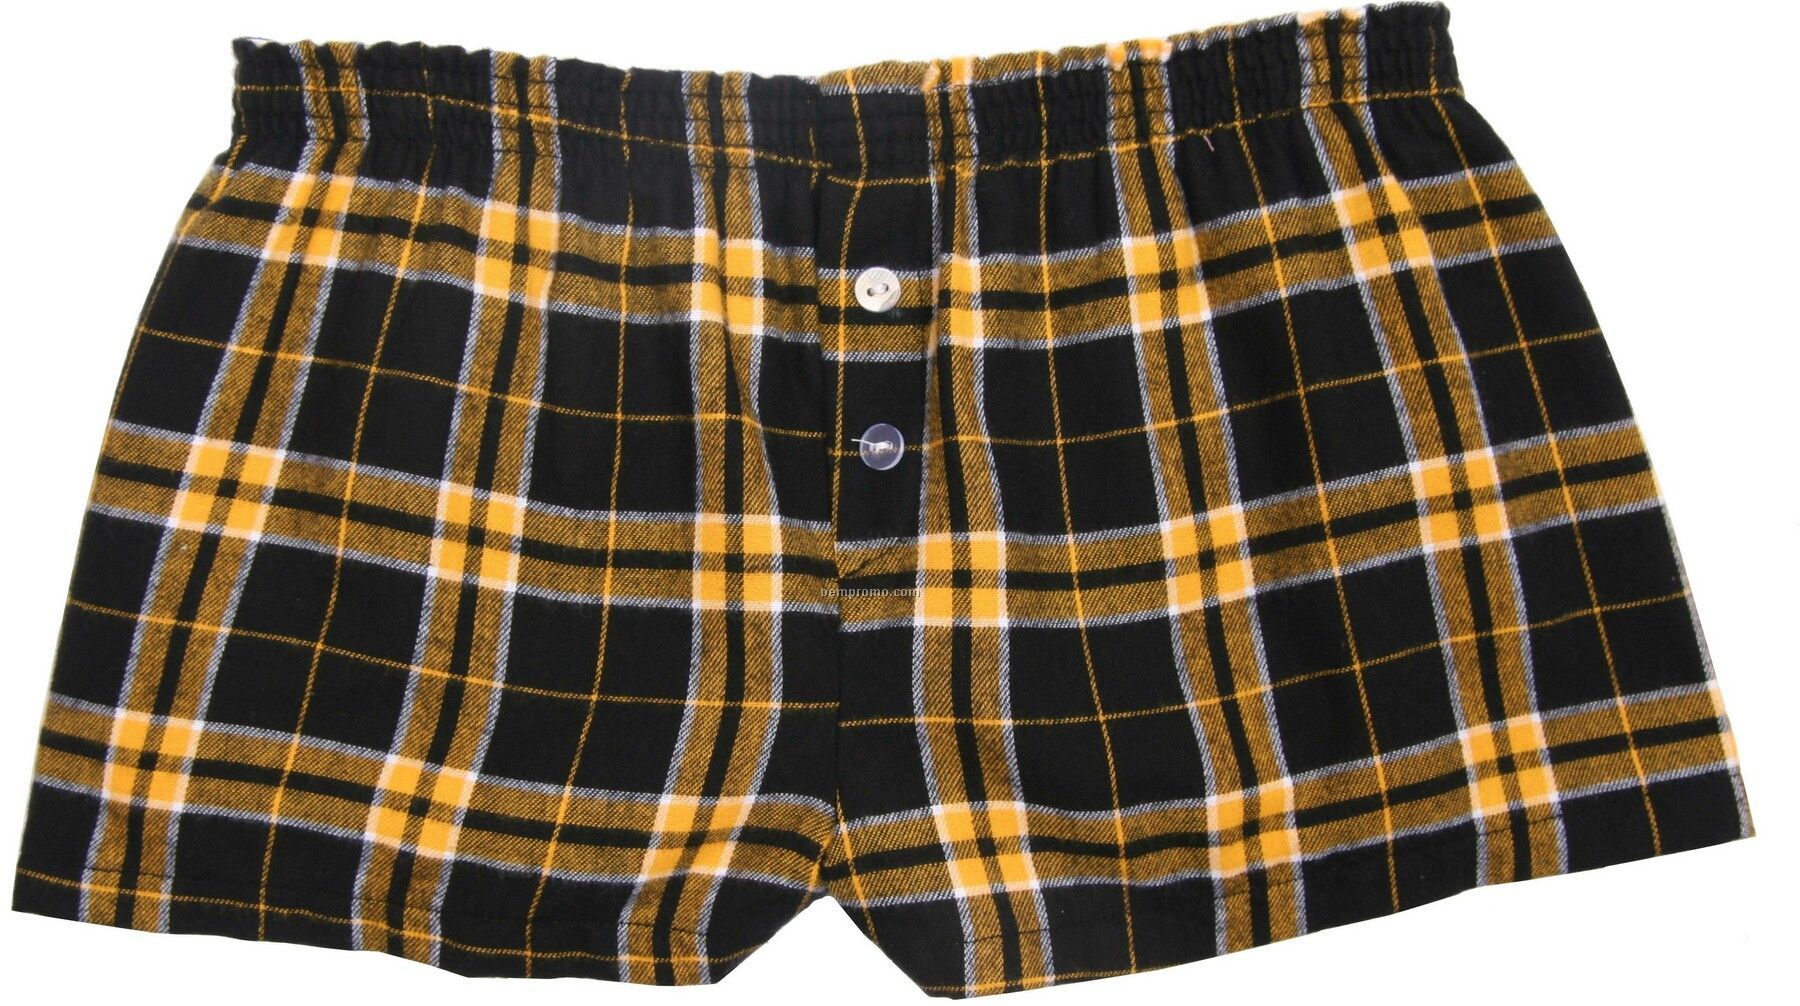 Ladies' Black/Gold Flannel Bitty Boxer Short With False Fly